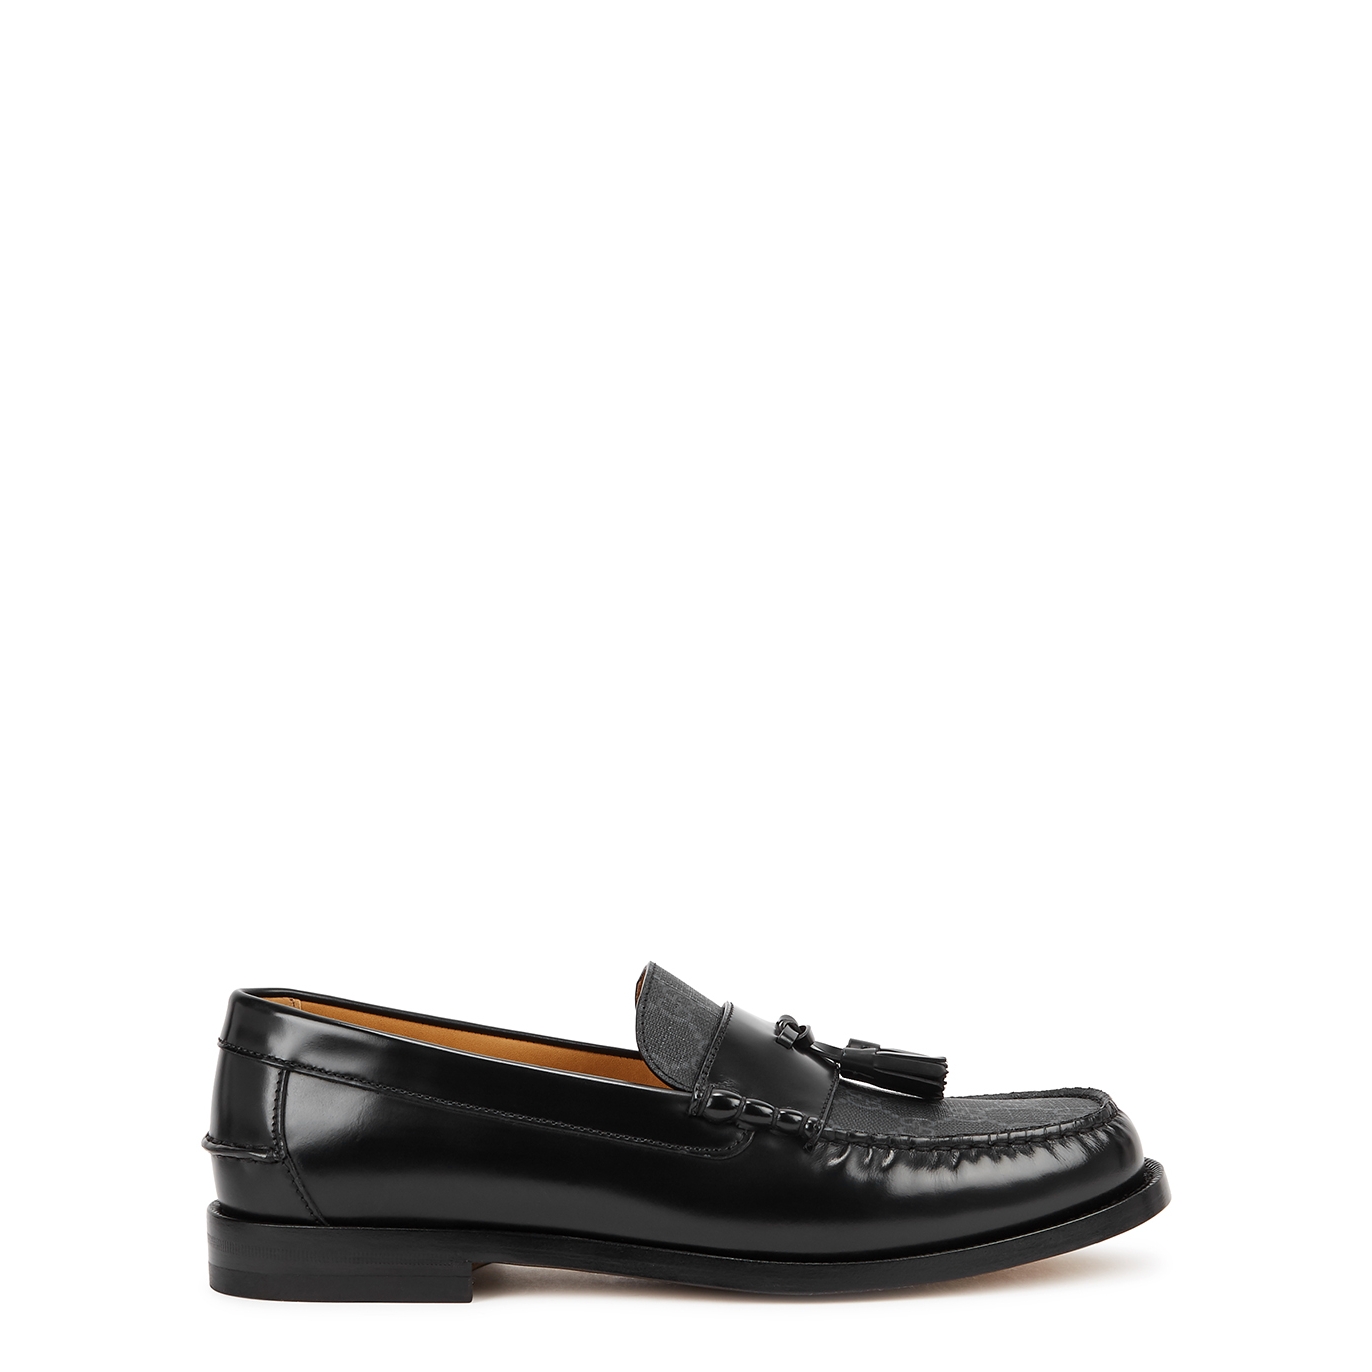 Gucci Kaveh GG Supreme Black Leather Loafers - 9